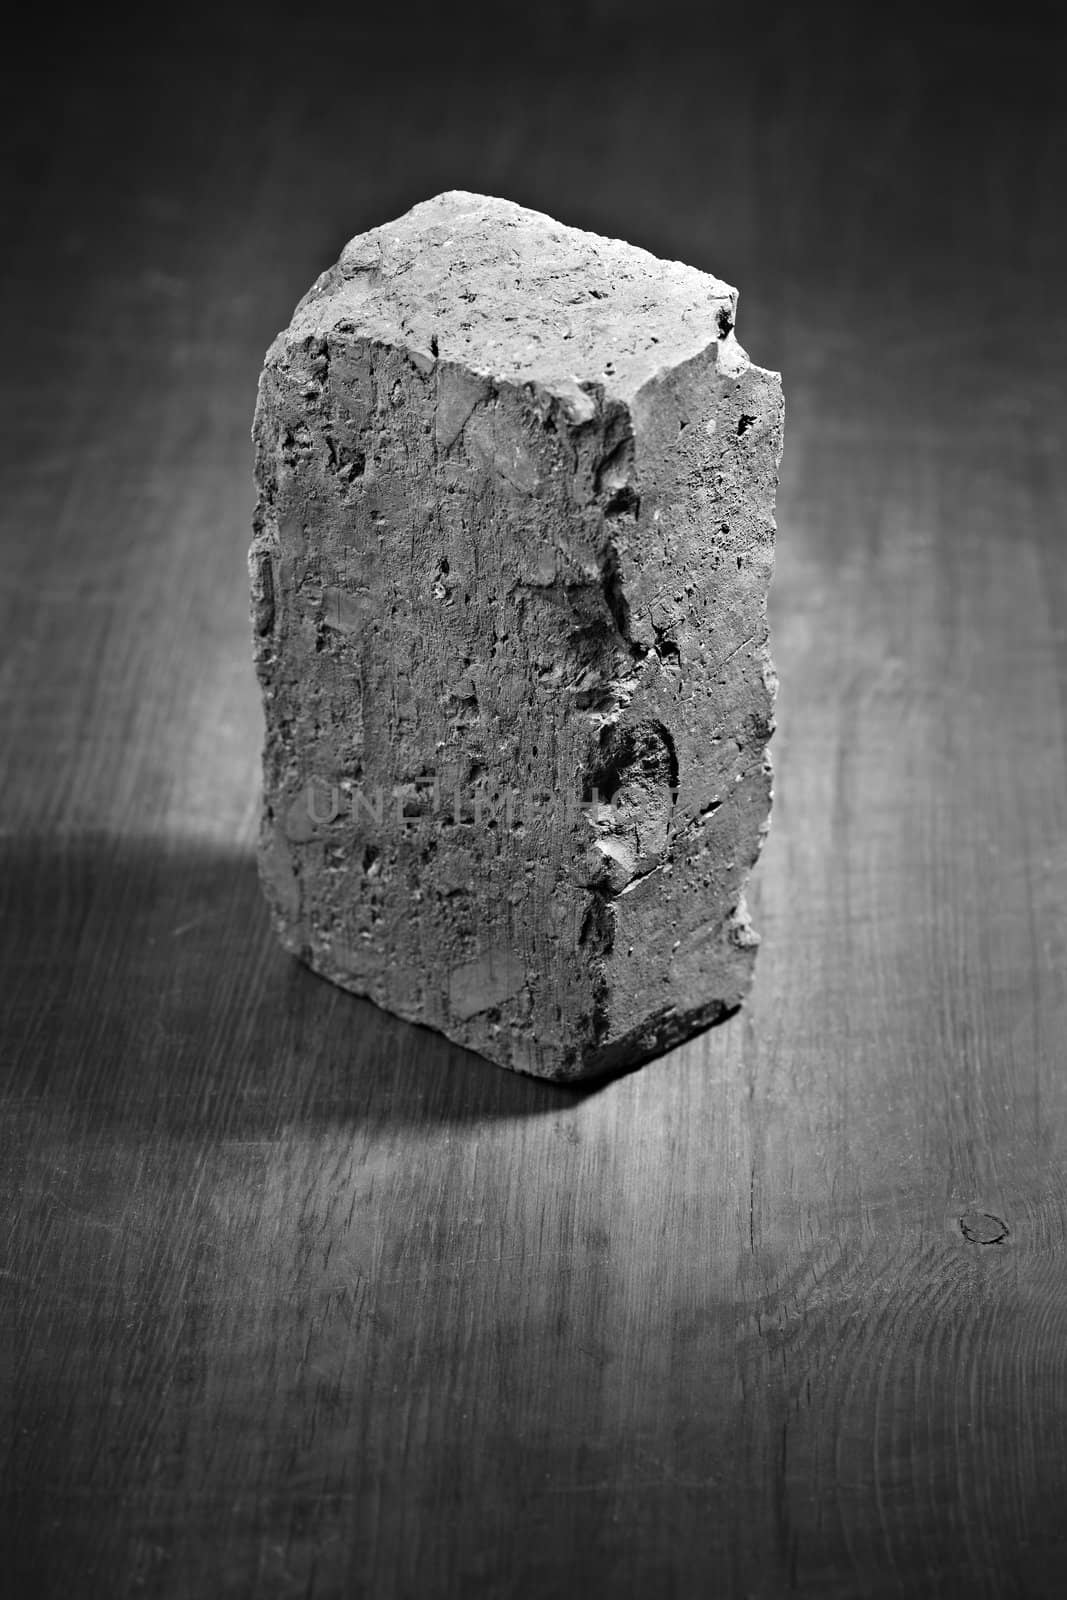 Black and white image of an old and worn brick